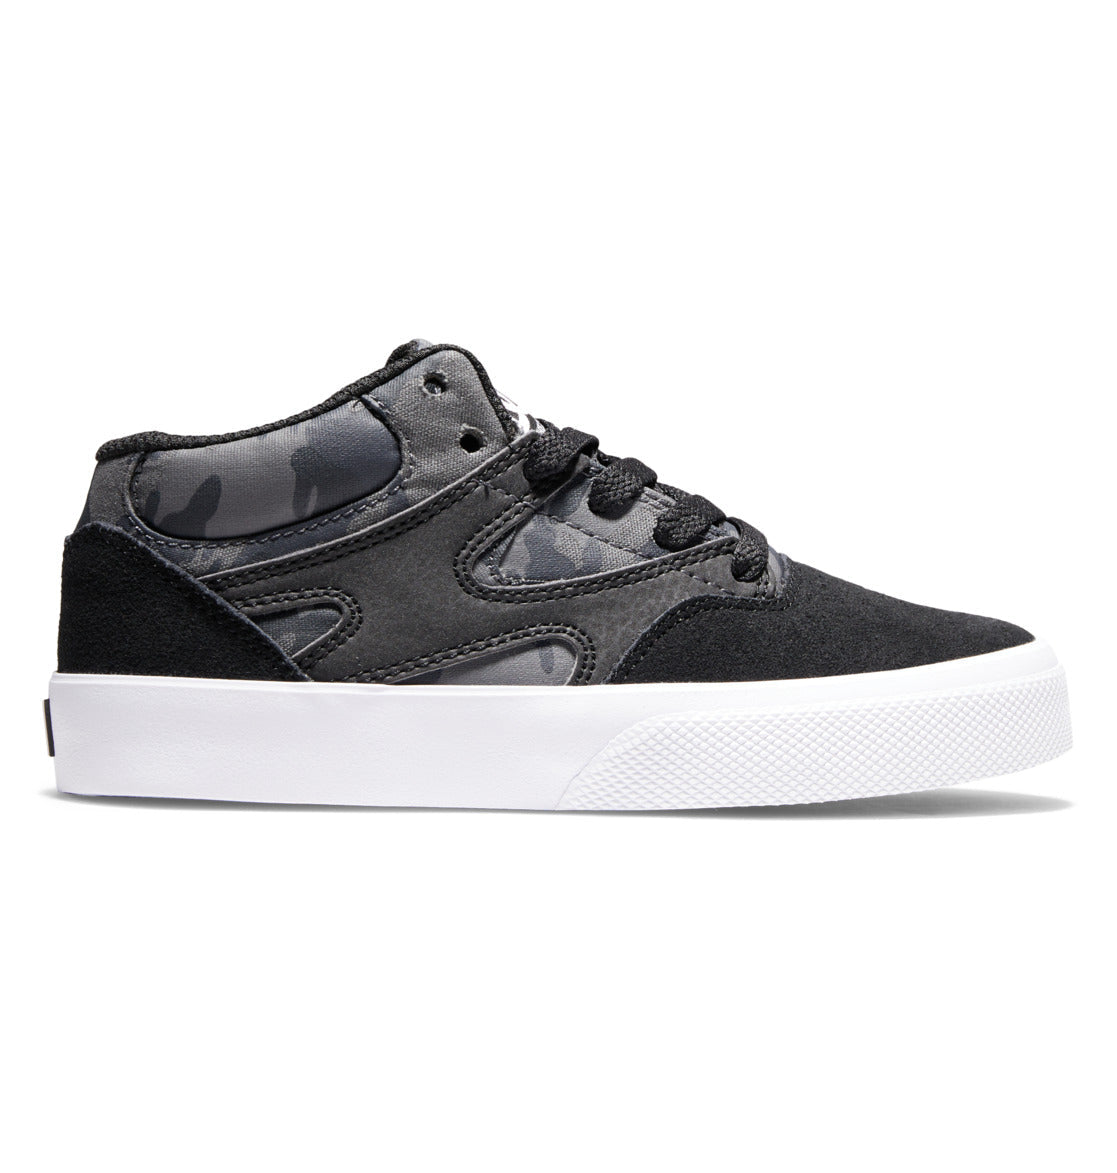 DC Youth Kalis Vulc MID Shoes Black Camouflage Youth and Toddler Skate Shoes DC 